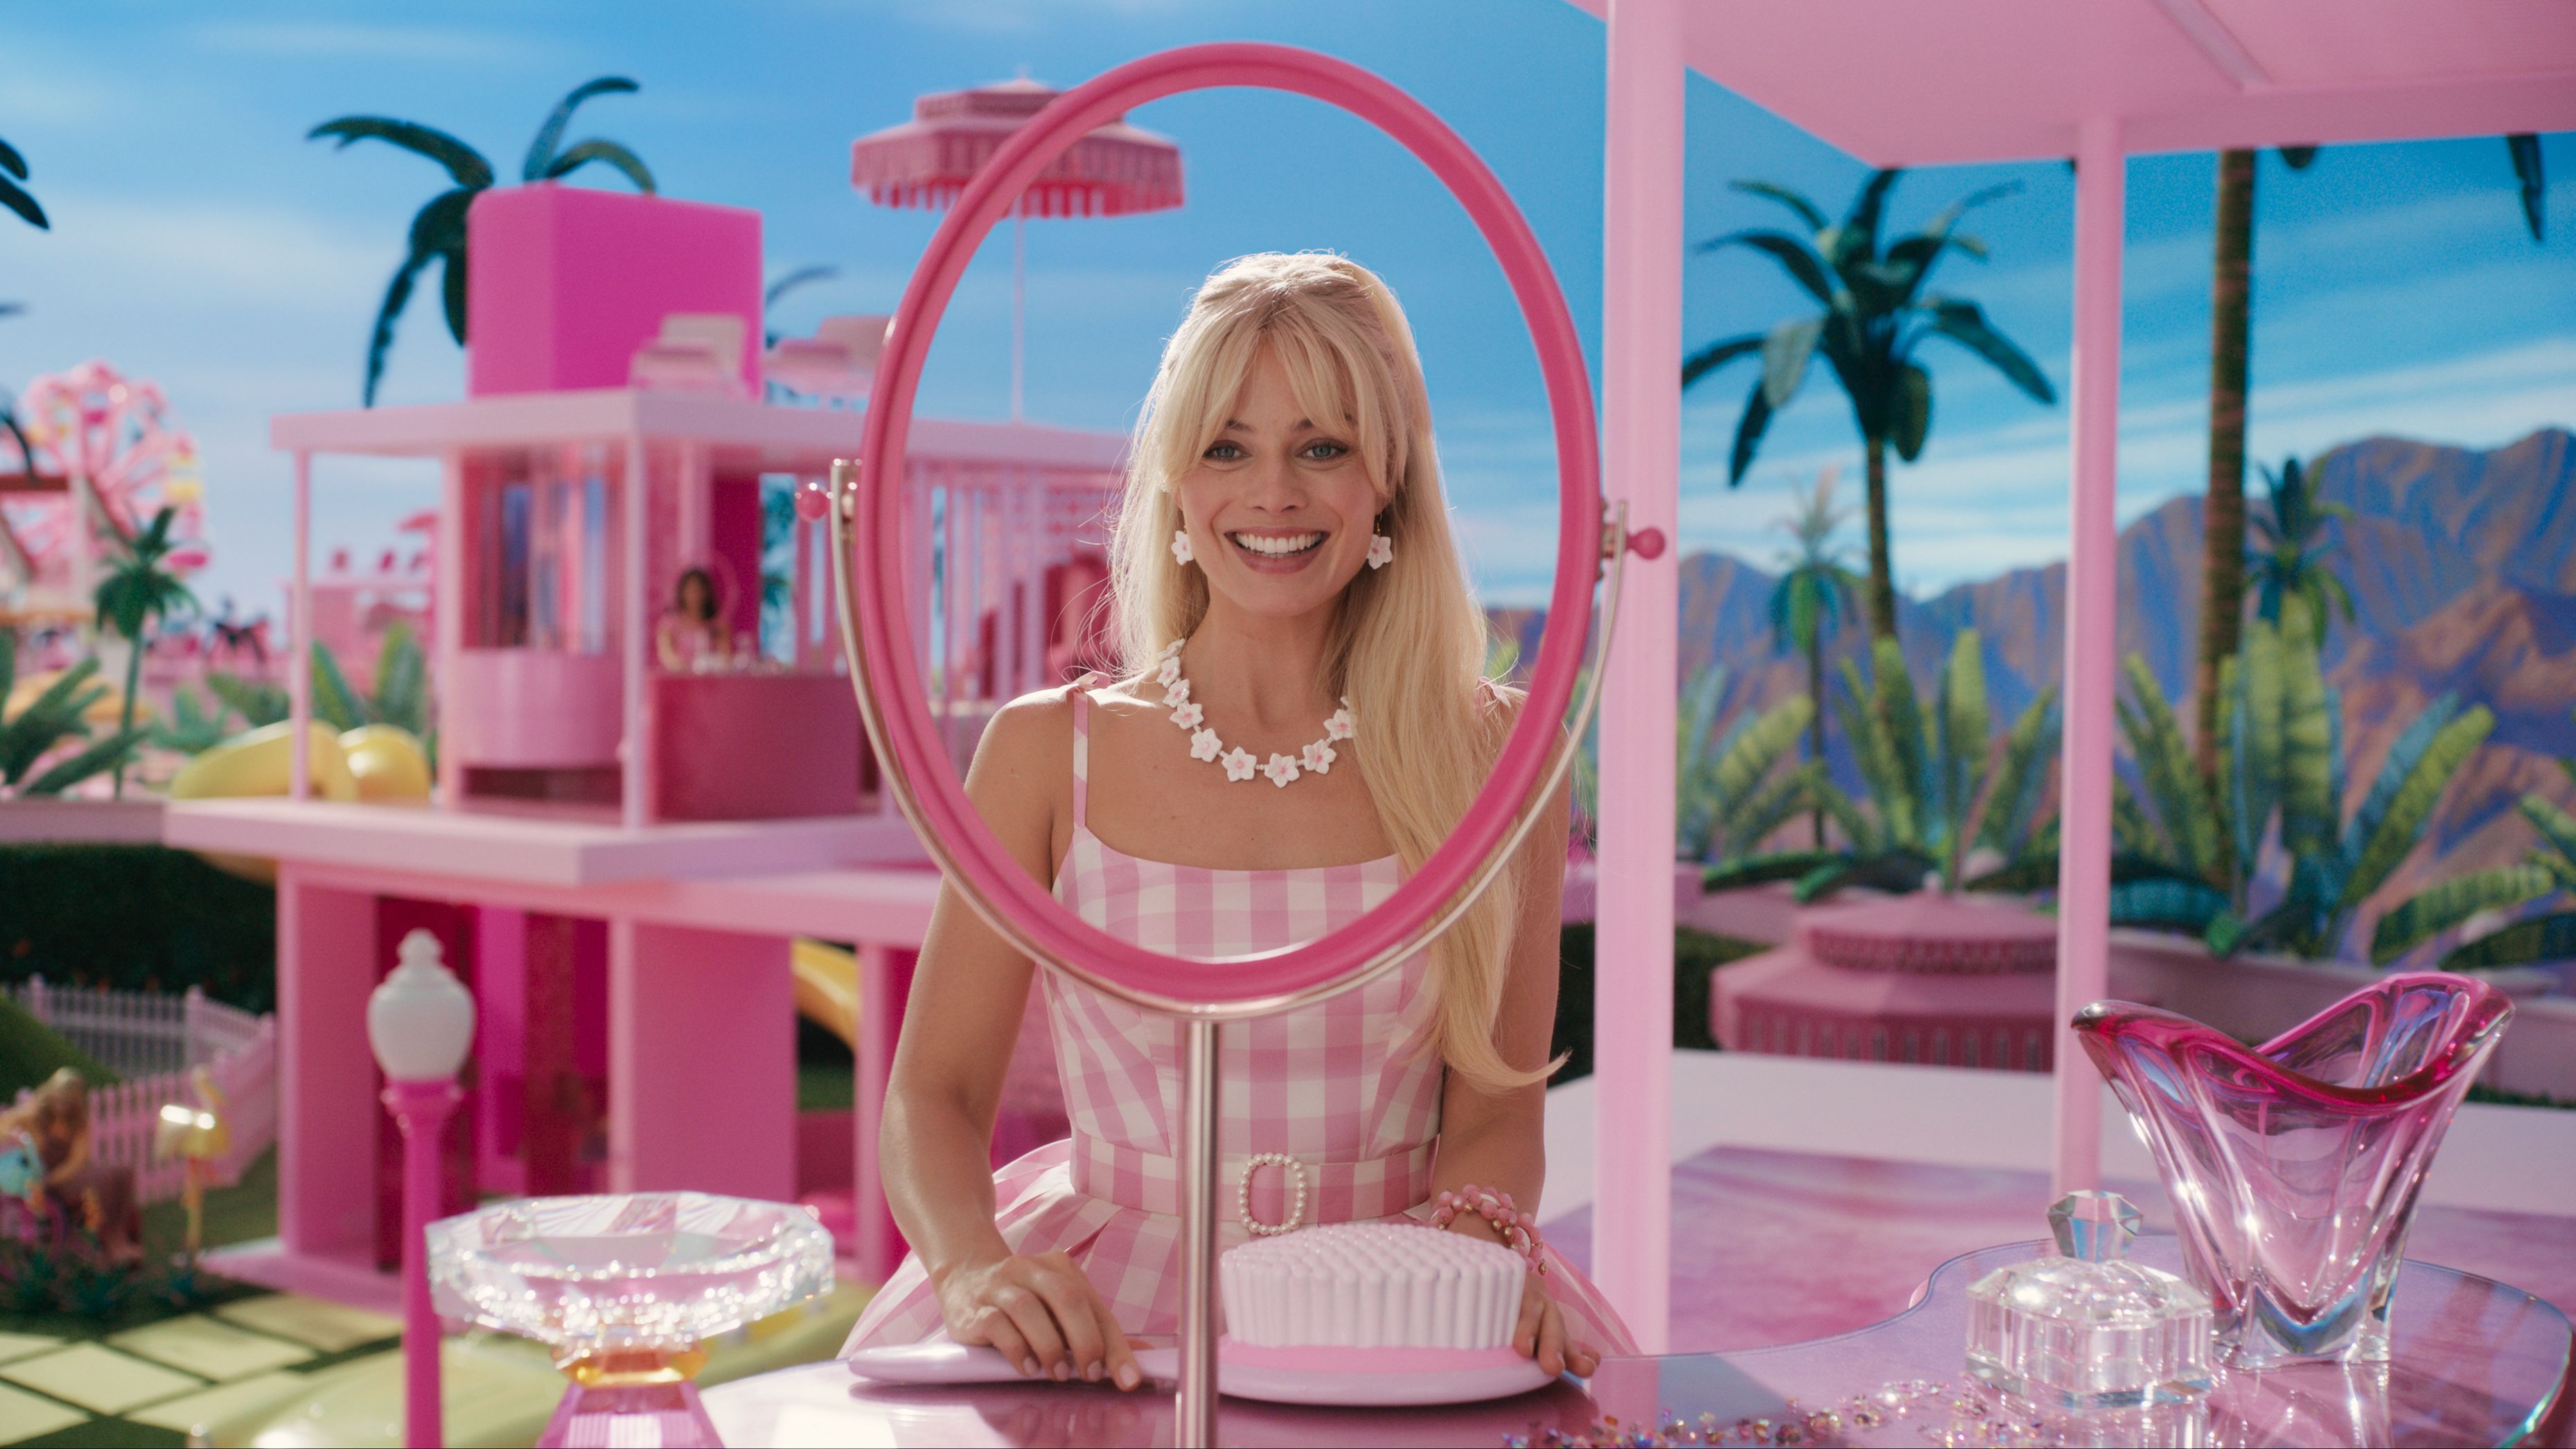 Barbie Dreamhouse Over Six Decades: An Architectural Tour - The New York  Times